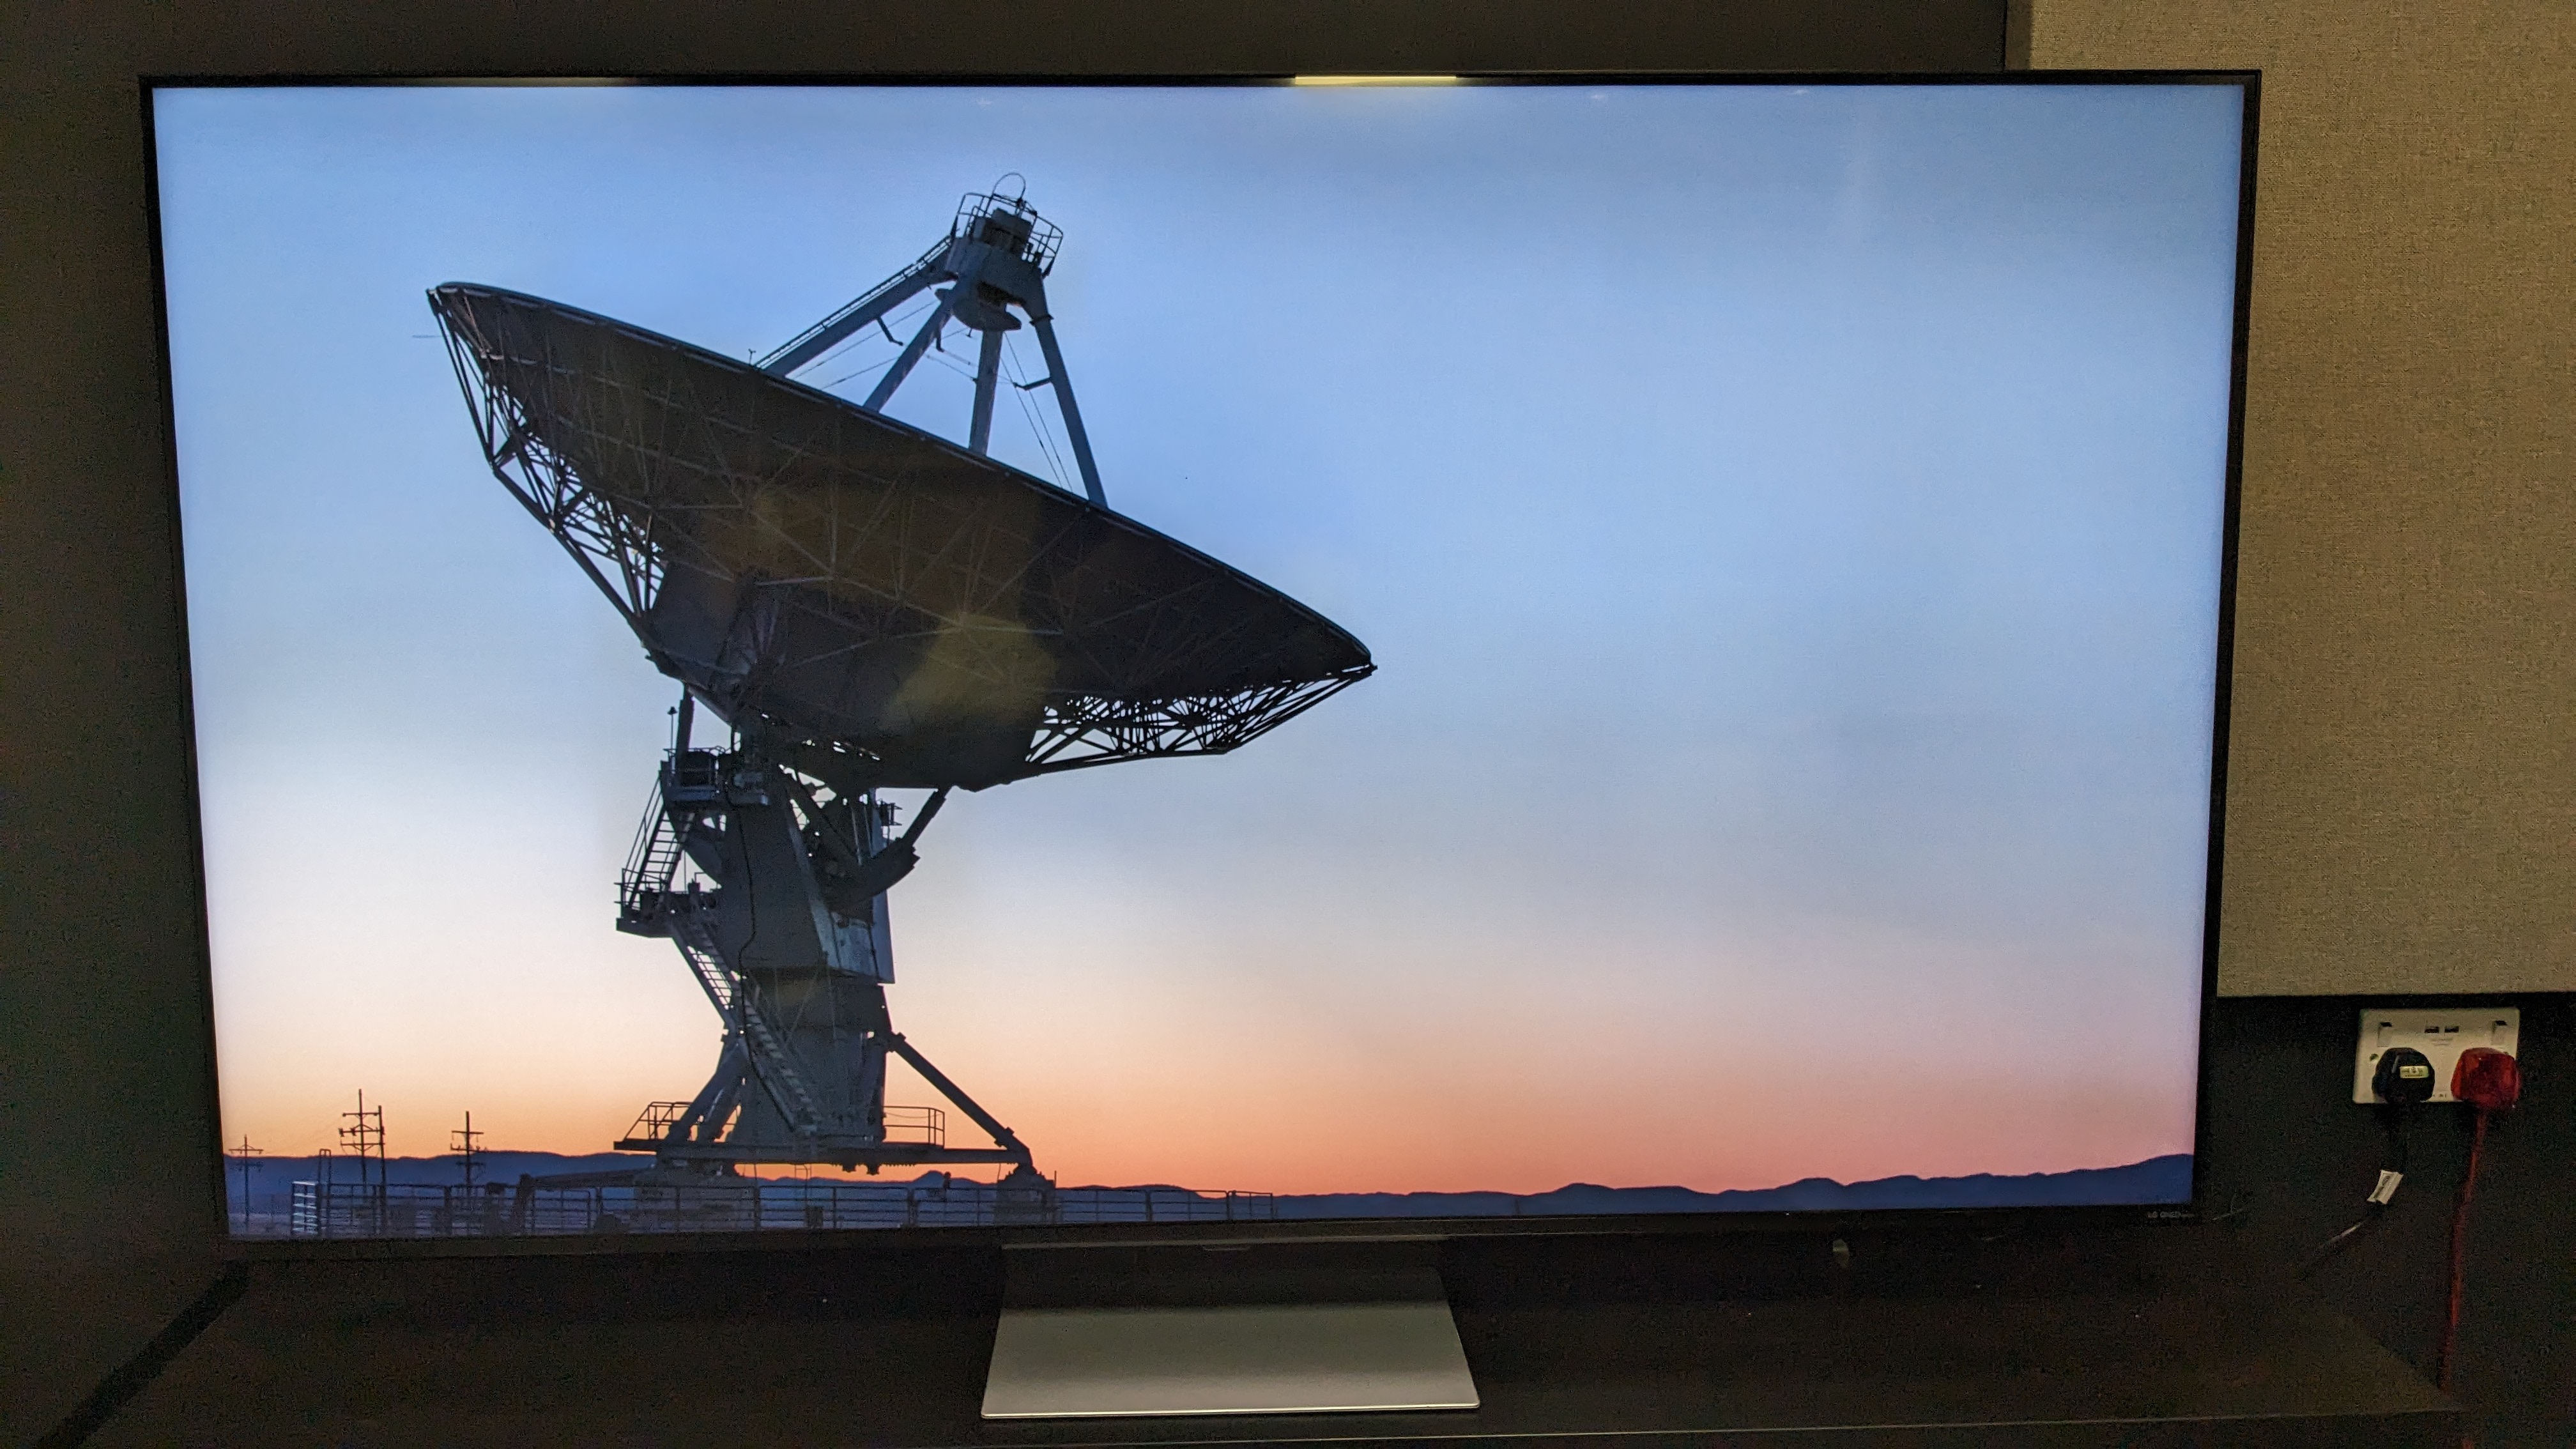 LG QNED91T with satellite on screen